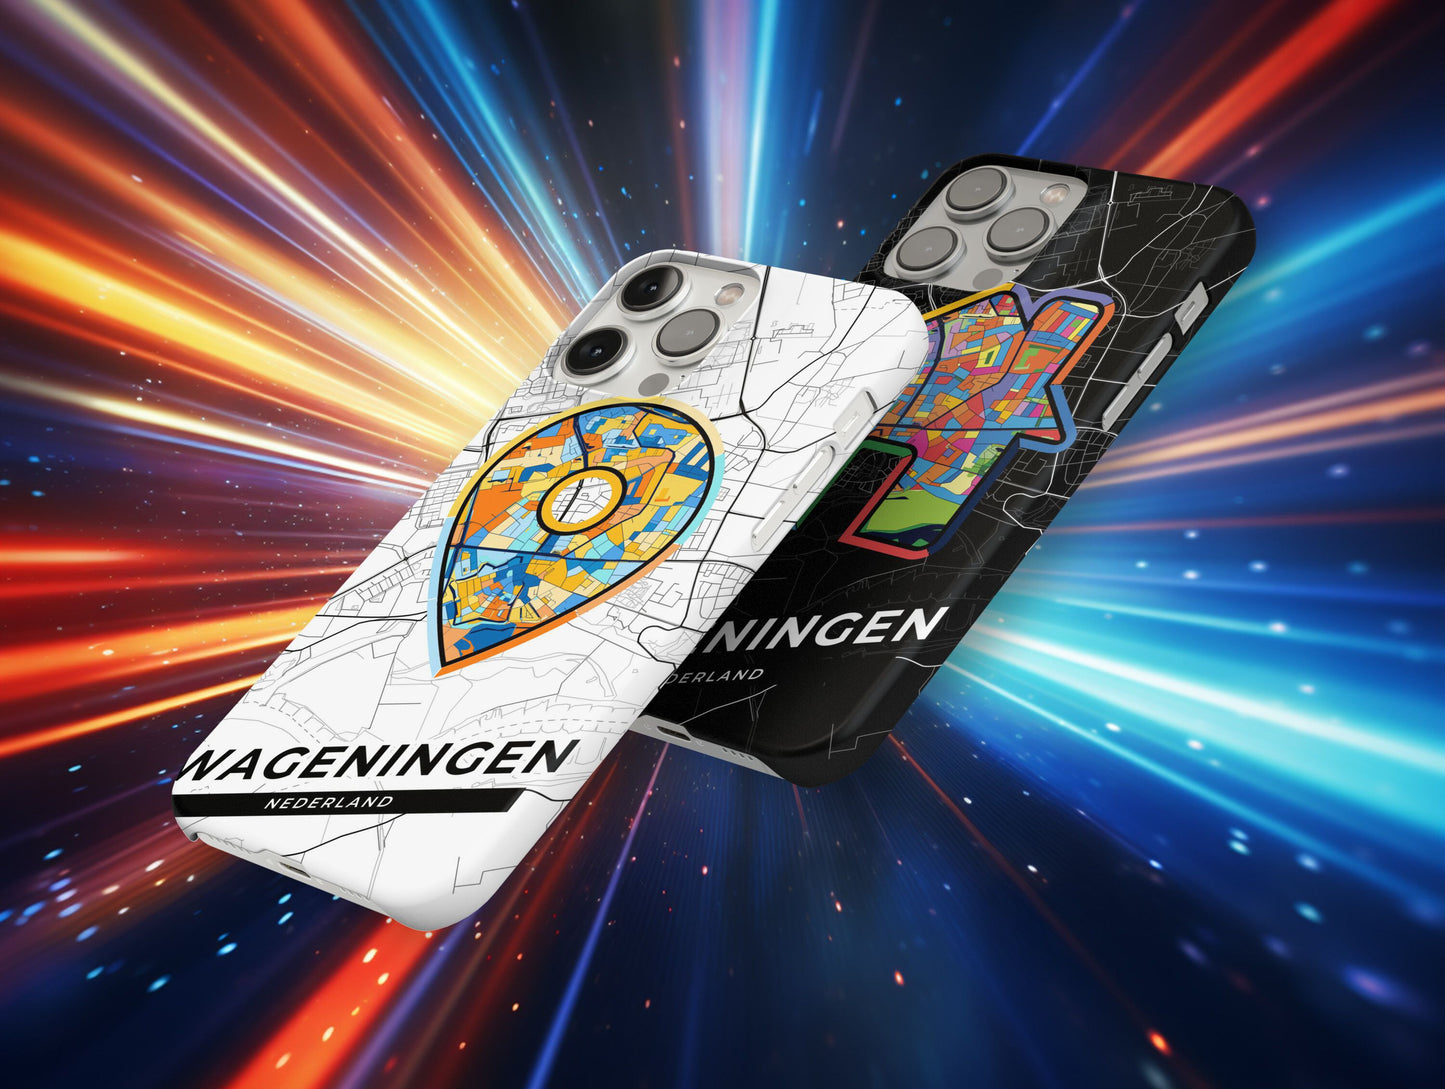 Wageningen Netherlands slim phone case with colorful icon